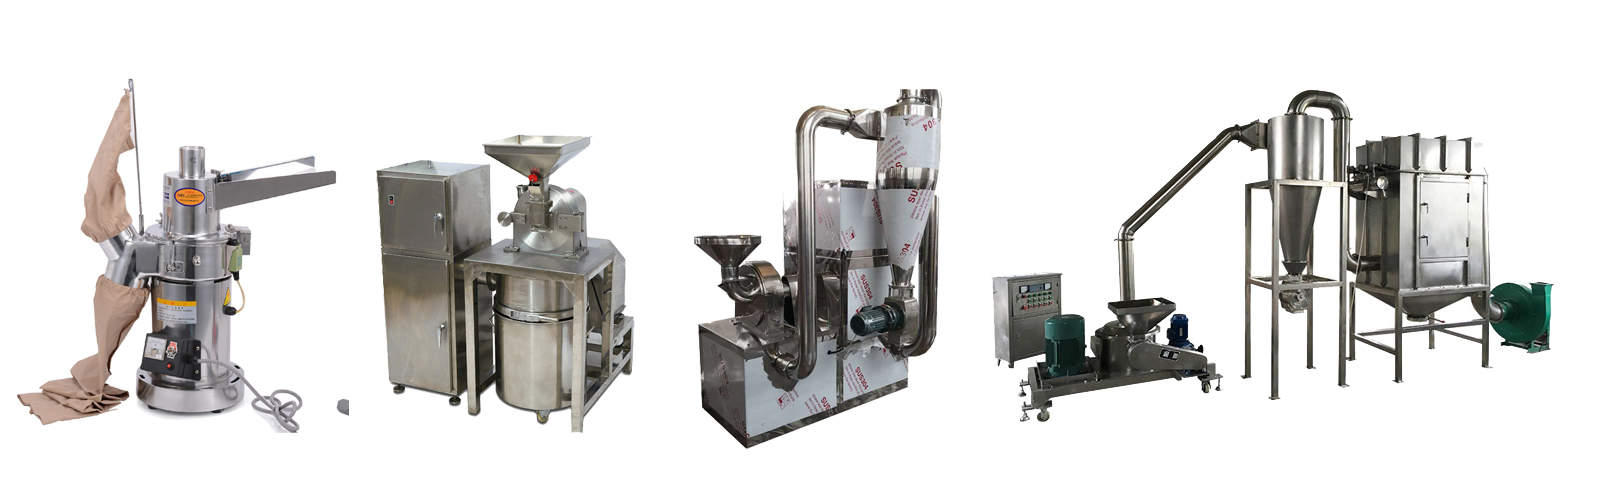 powder grinding machines for pharmaceutical